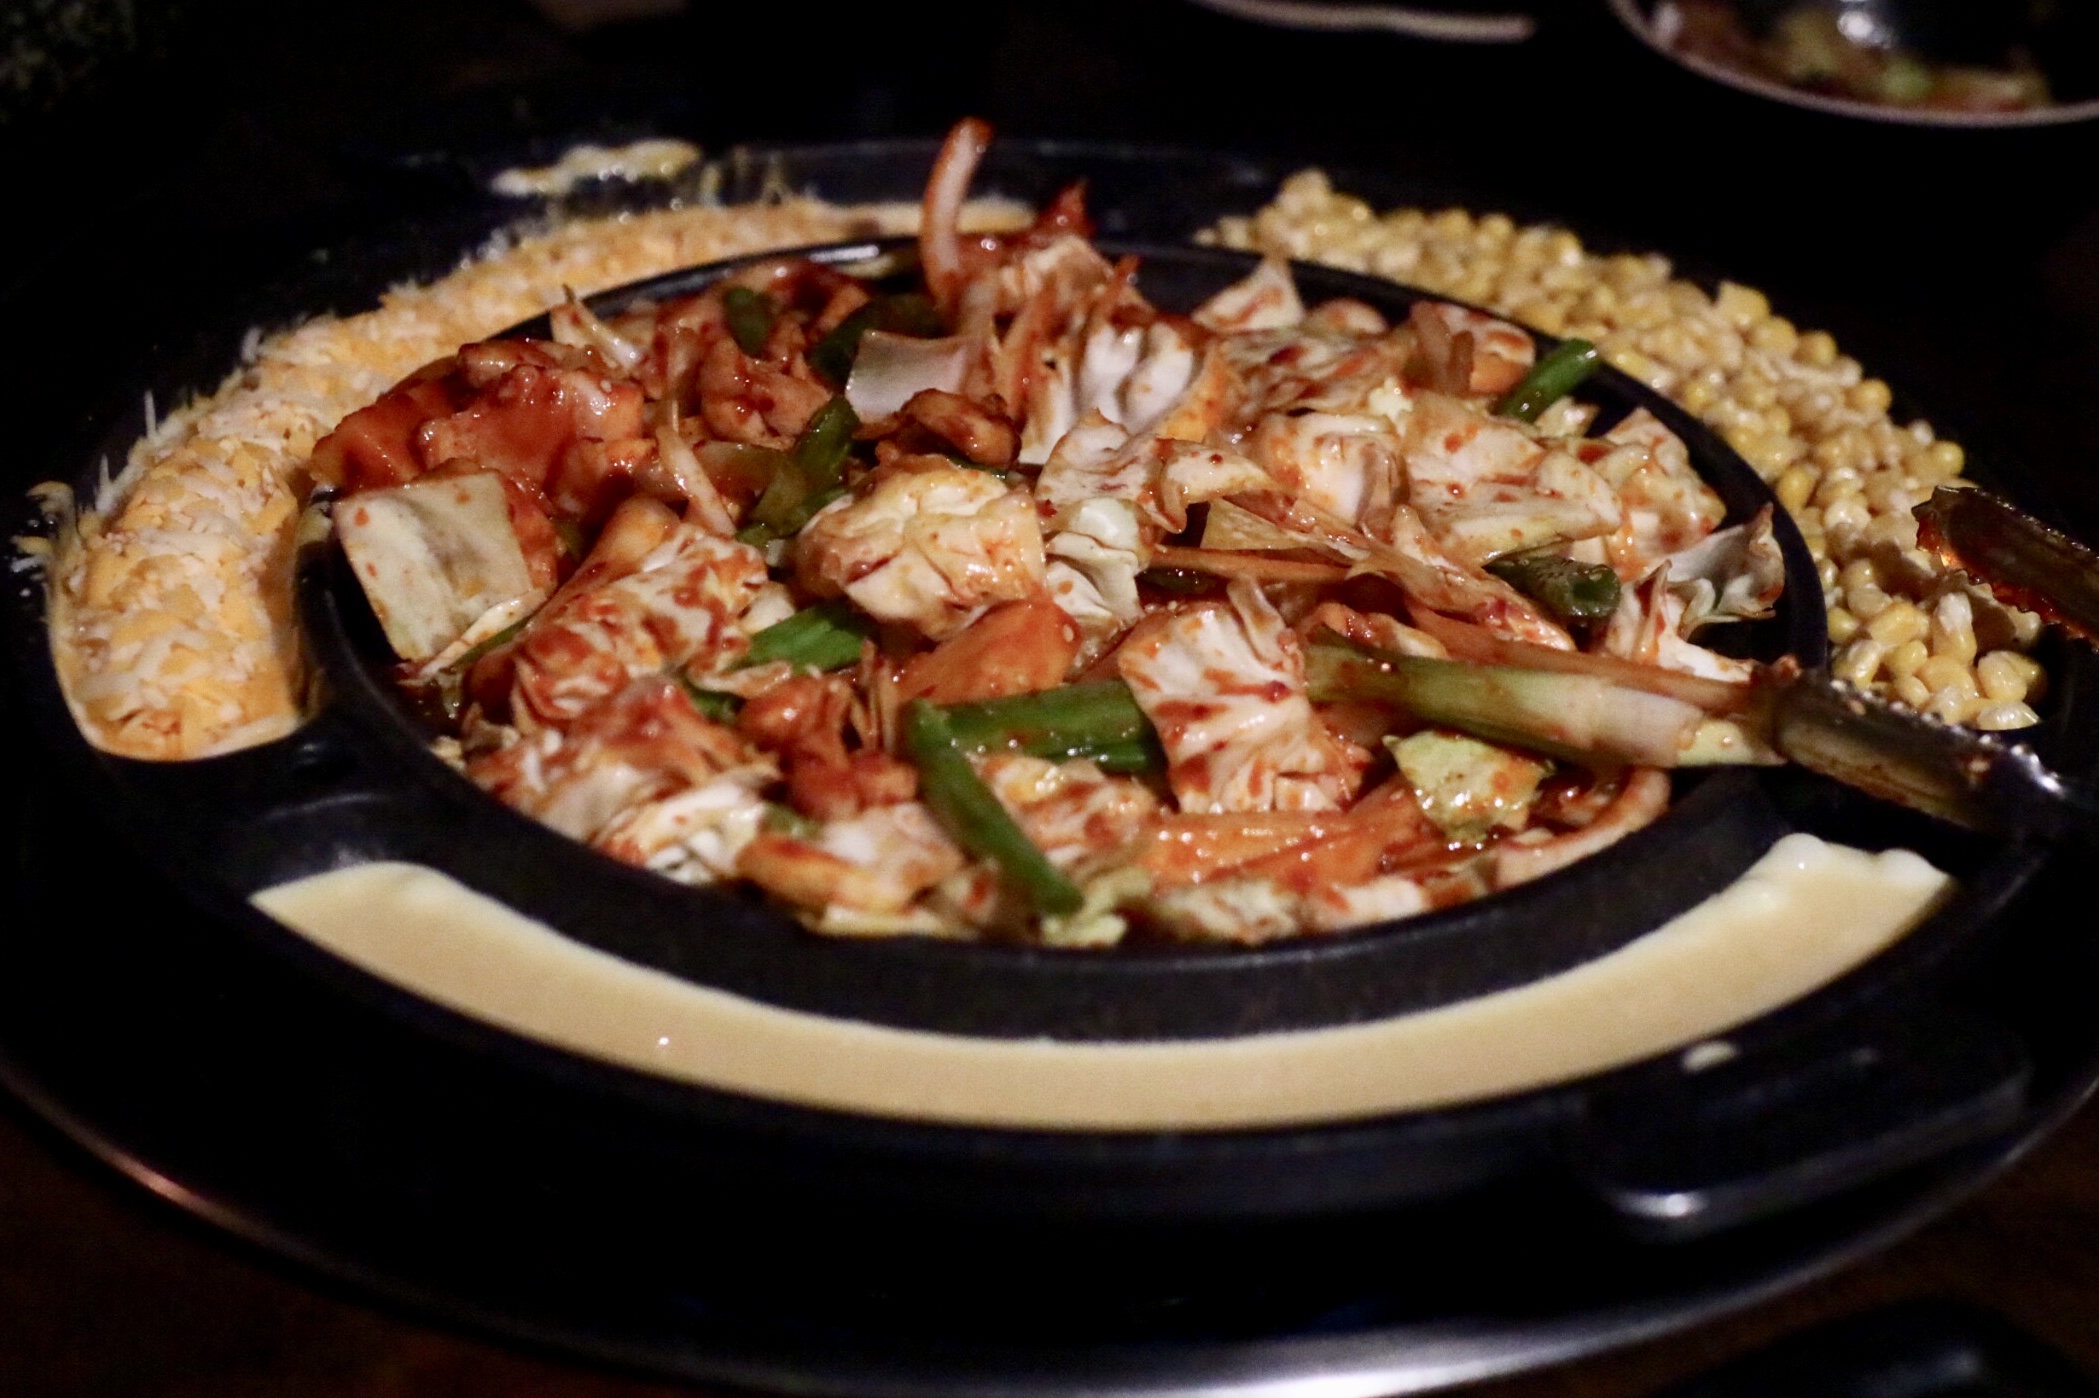 Korean Hot Plate with Spicy Chicken + Cheese